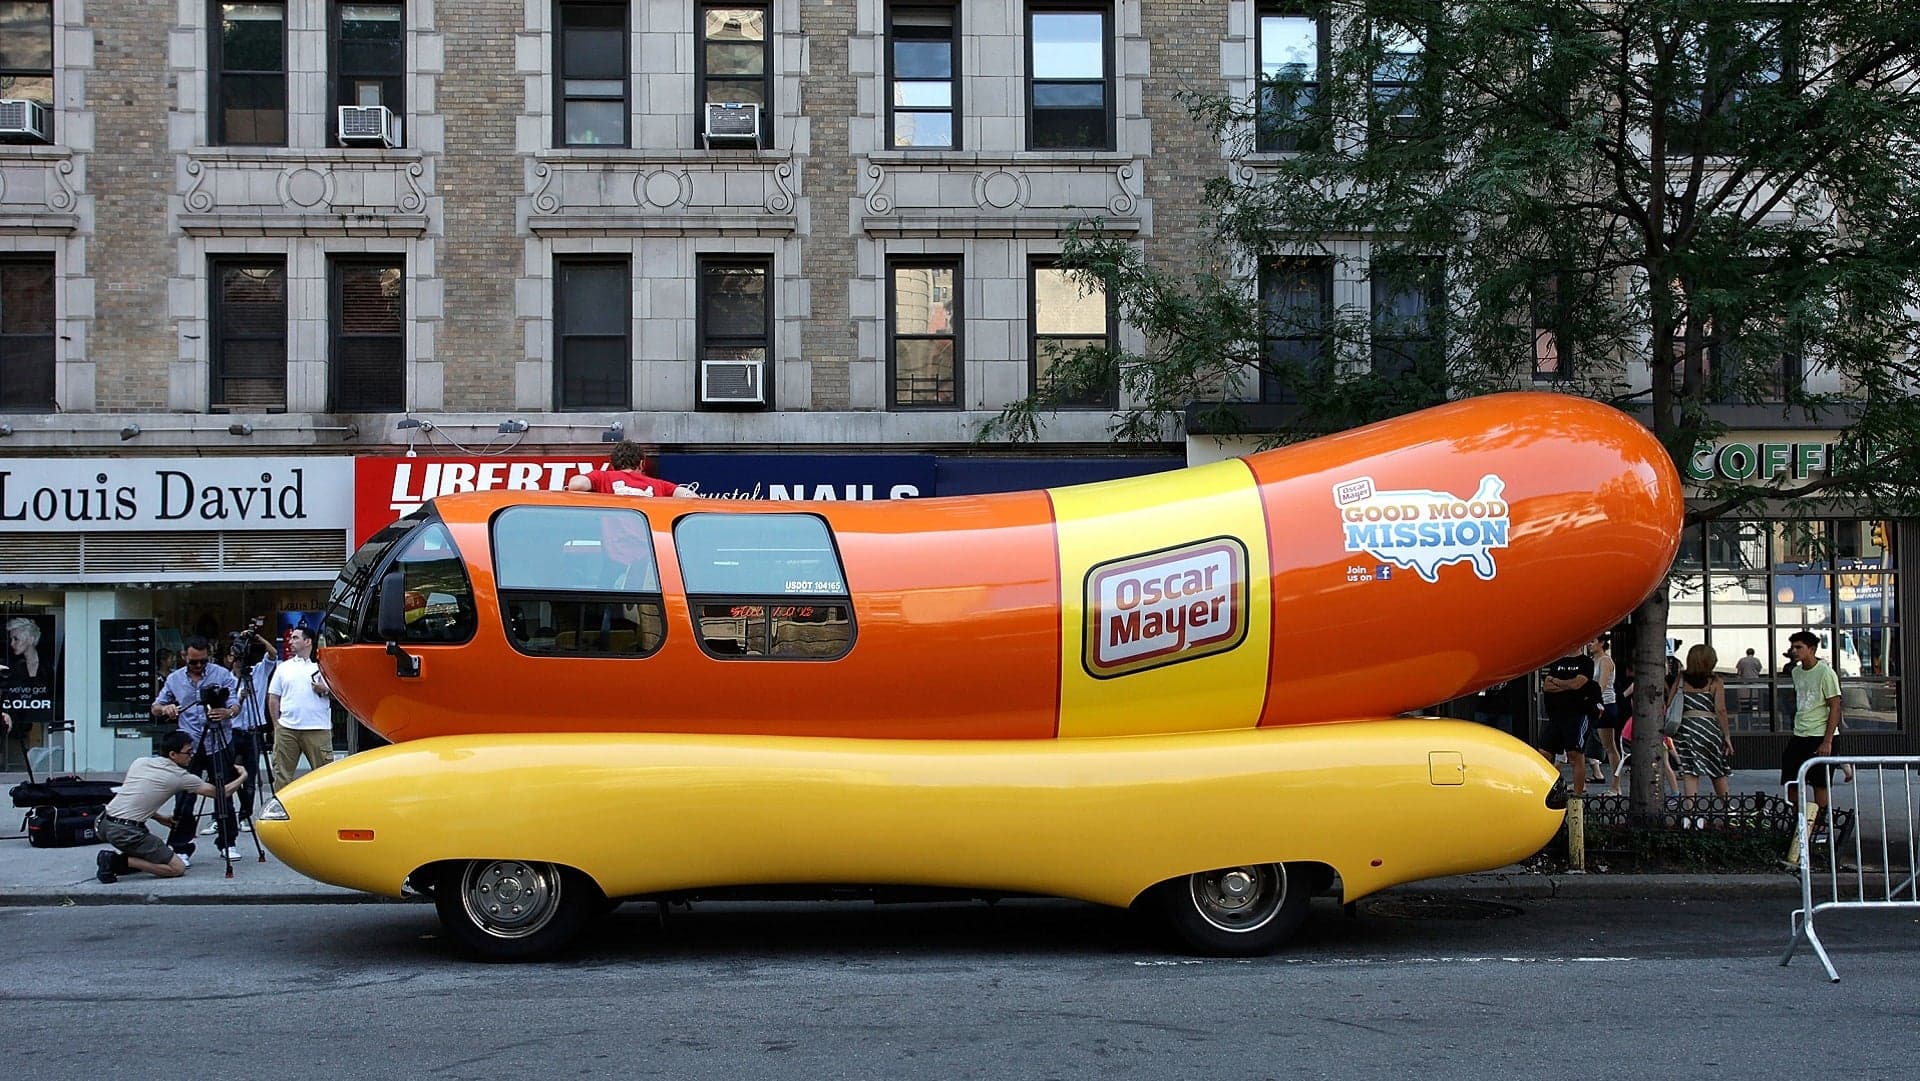 Craving a New Career? The Oscar Mayer Wienermobile Needs a Full-Time Driver